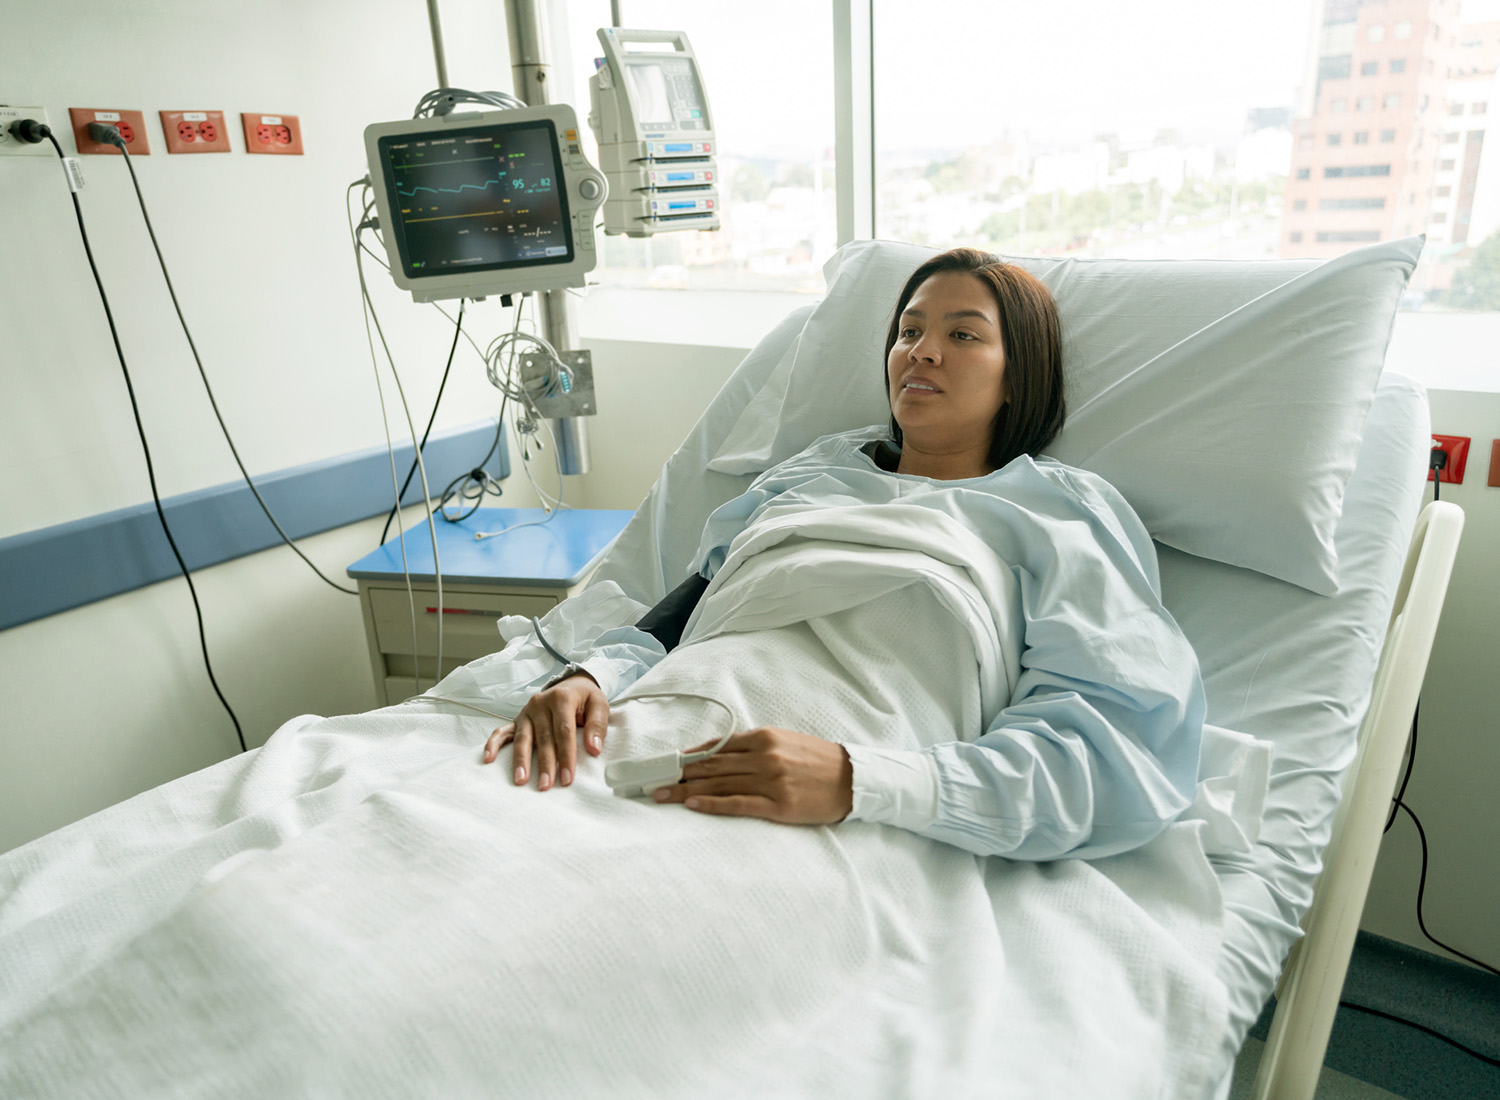 woman in hospital bed waiting for colon surgery, colon & rectal surgeons, colon and rectal surgeon, colon and rectal surgery, anus surgery, proctologist exam, colon, colon surgery